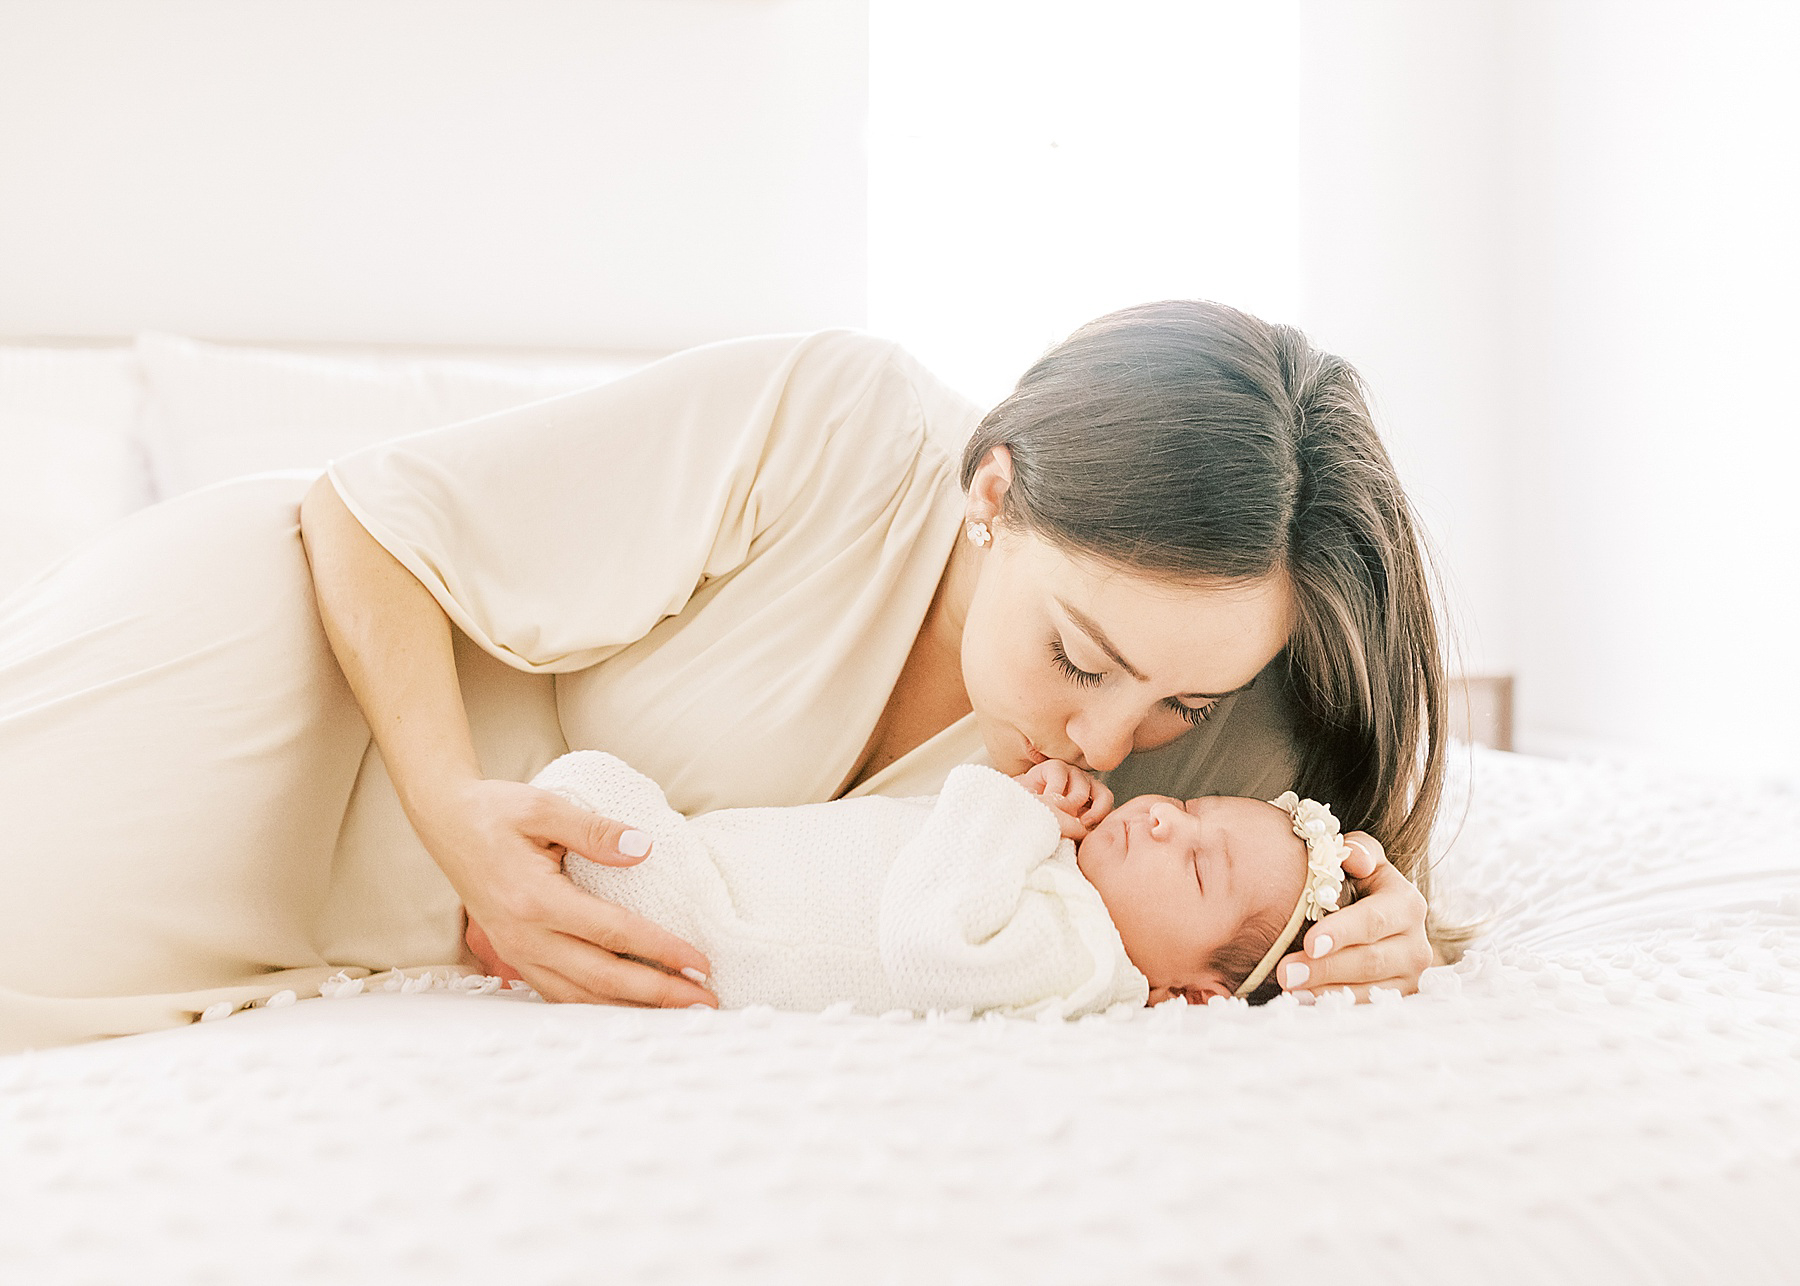 woman with long dark hair kissing newborn baby on white bed